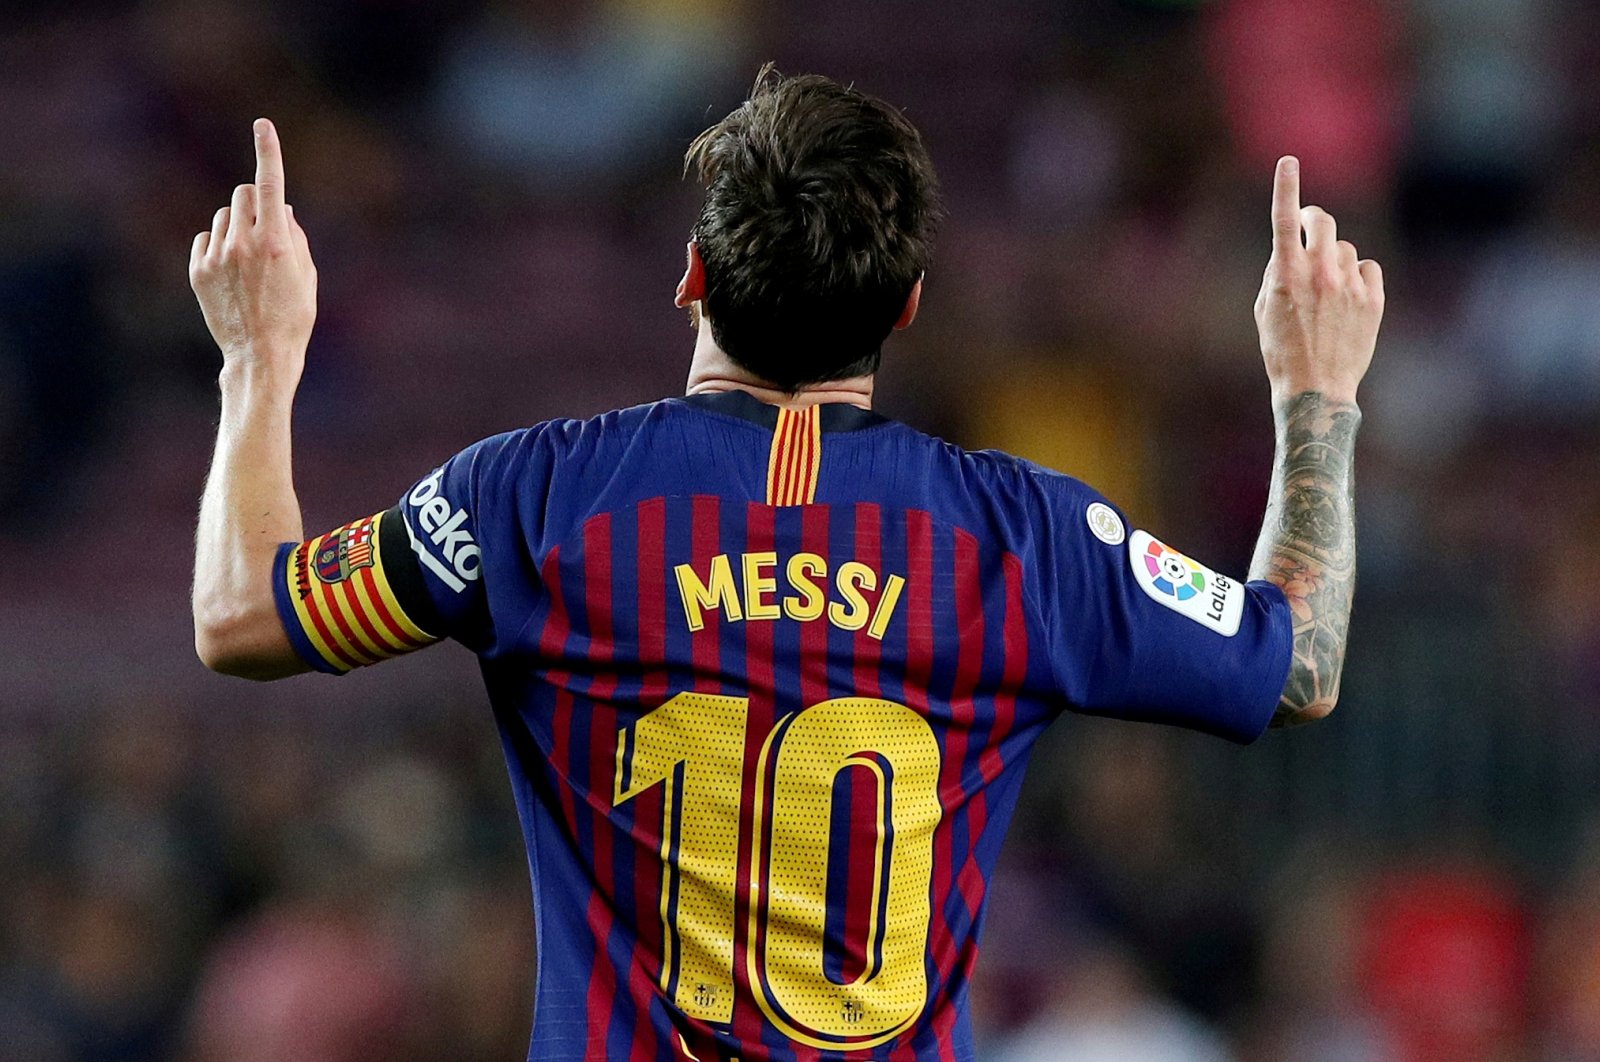 Lionel Messi celebrates a goal in a match against Alaves, in Barcelona, Spain, Aug. 18, 2018. (REUTERS Photo)   